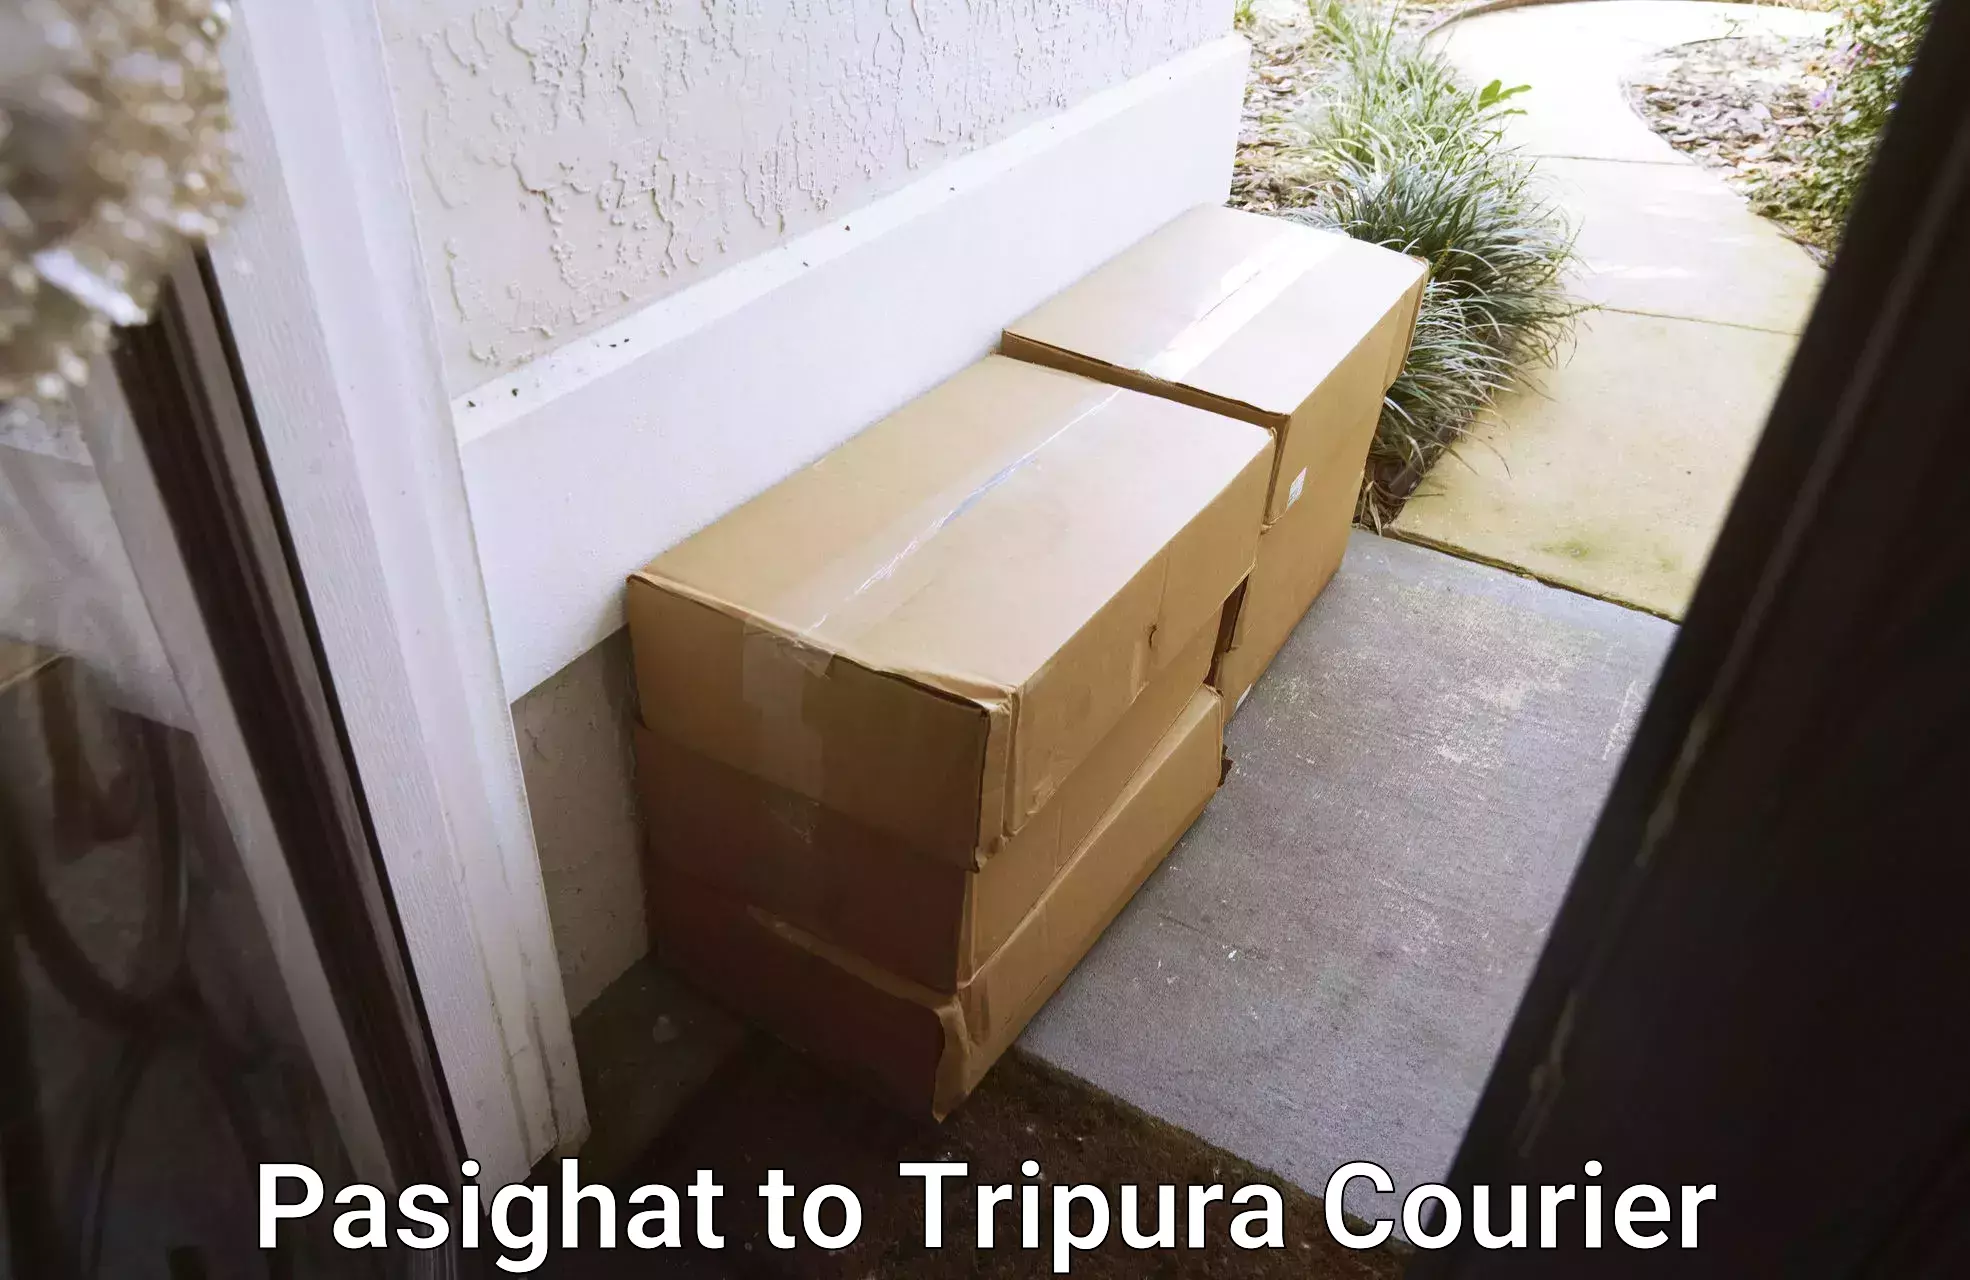 Courier service comparison in Pasighat to Tripura